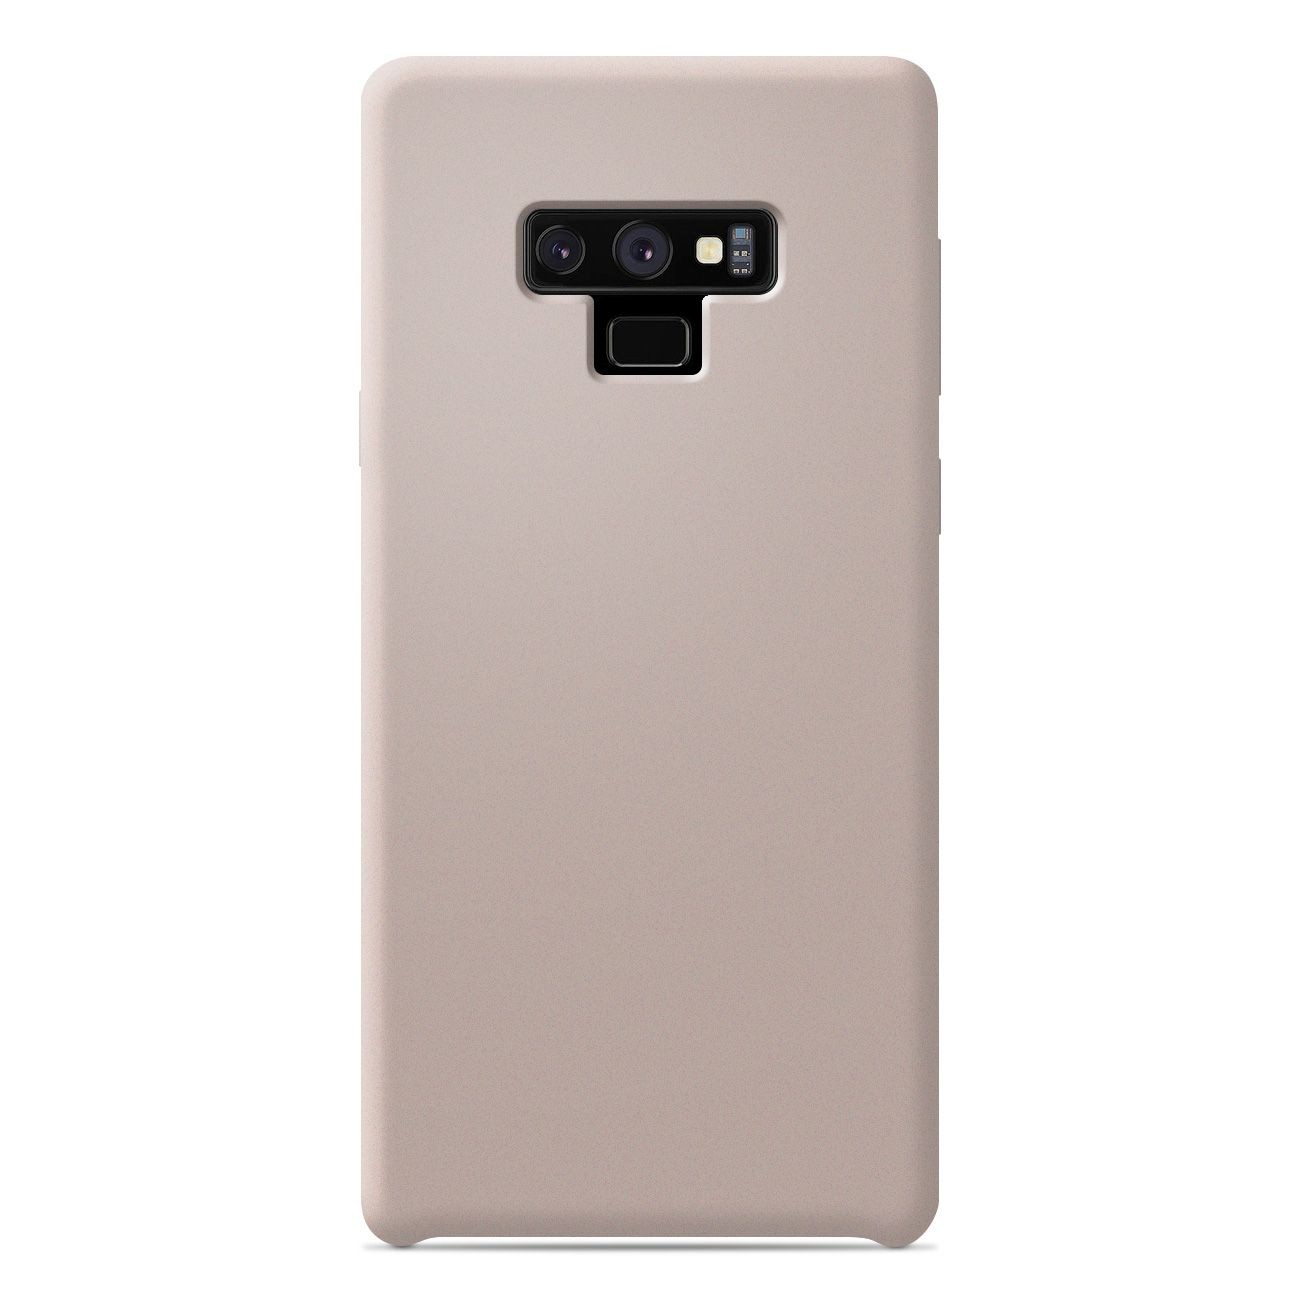 Coque silicone unie Soft Touch Sable rosé compatible Samsung Galaxy Note 9